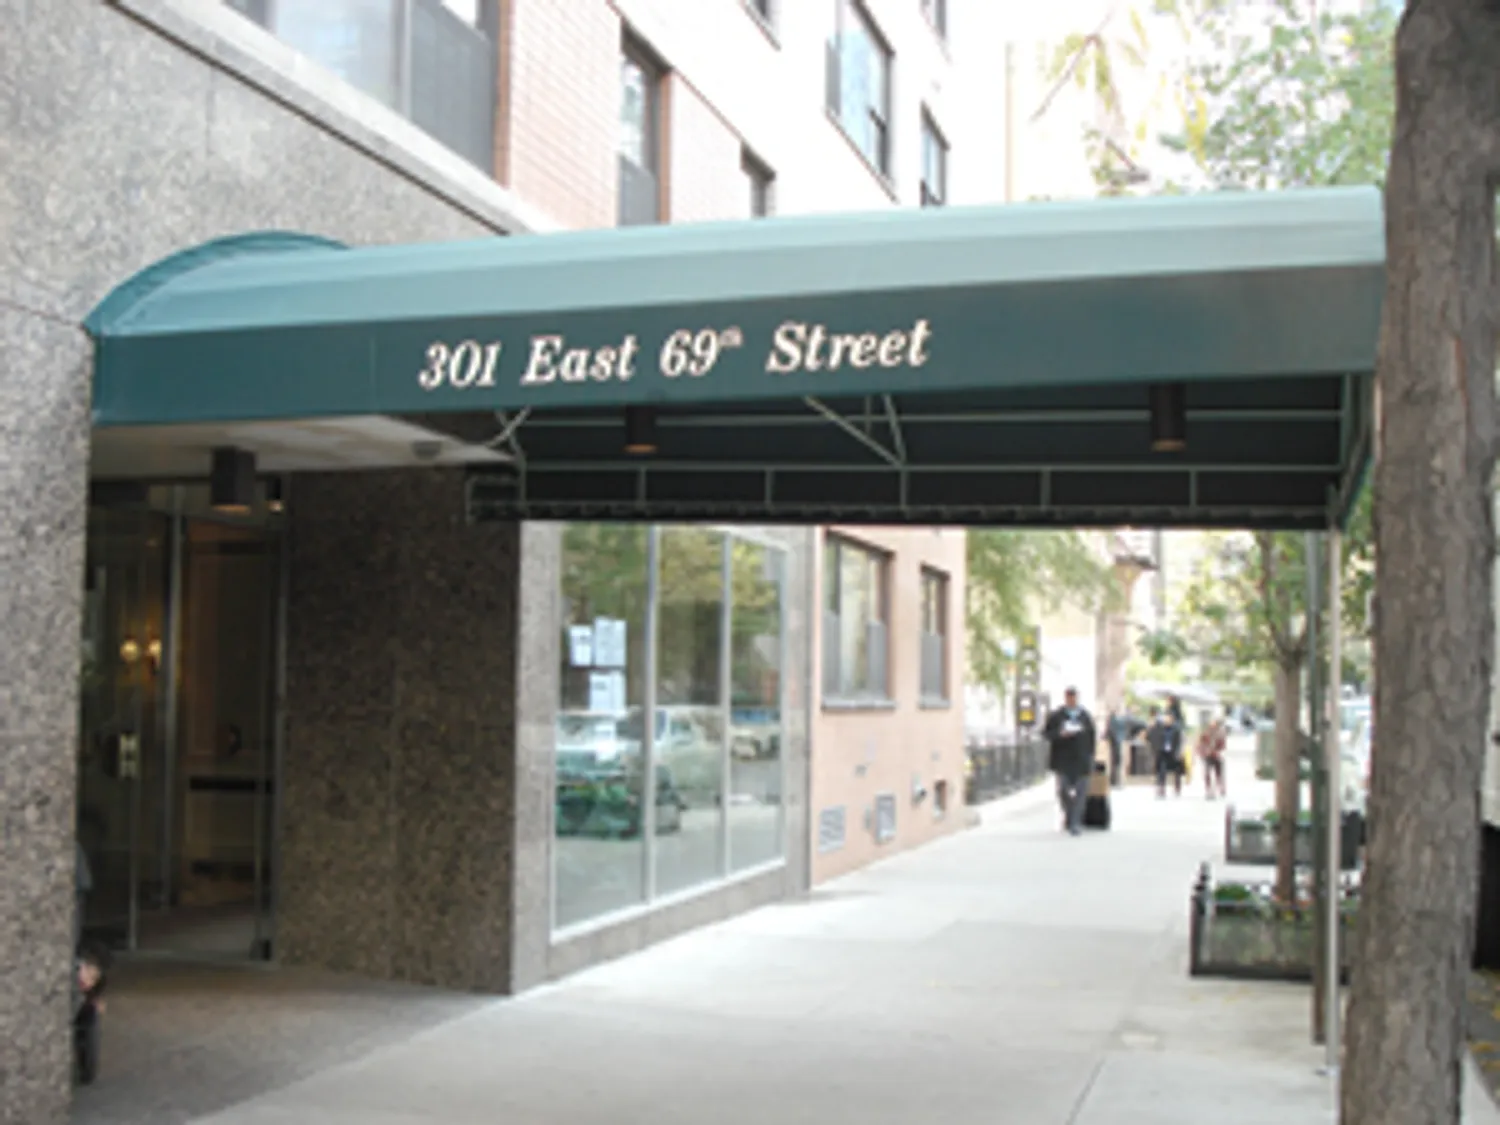 301 East 69th is on a lovely tree-lined block!